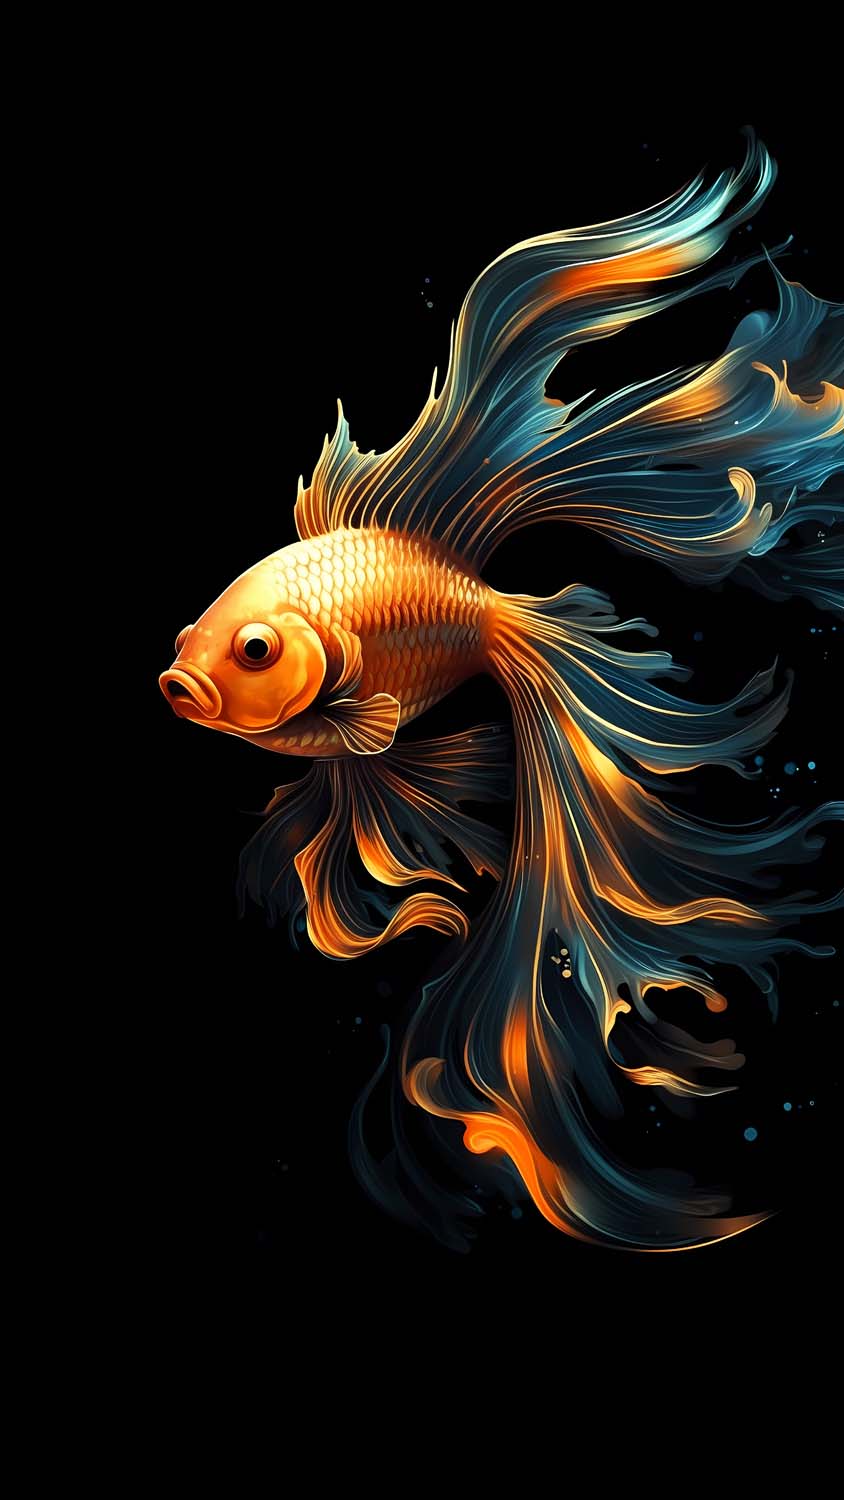 200+] Fish Iphone Wallpapers | Wallpapers.com